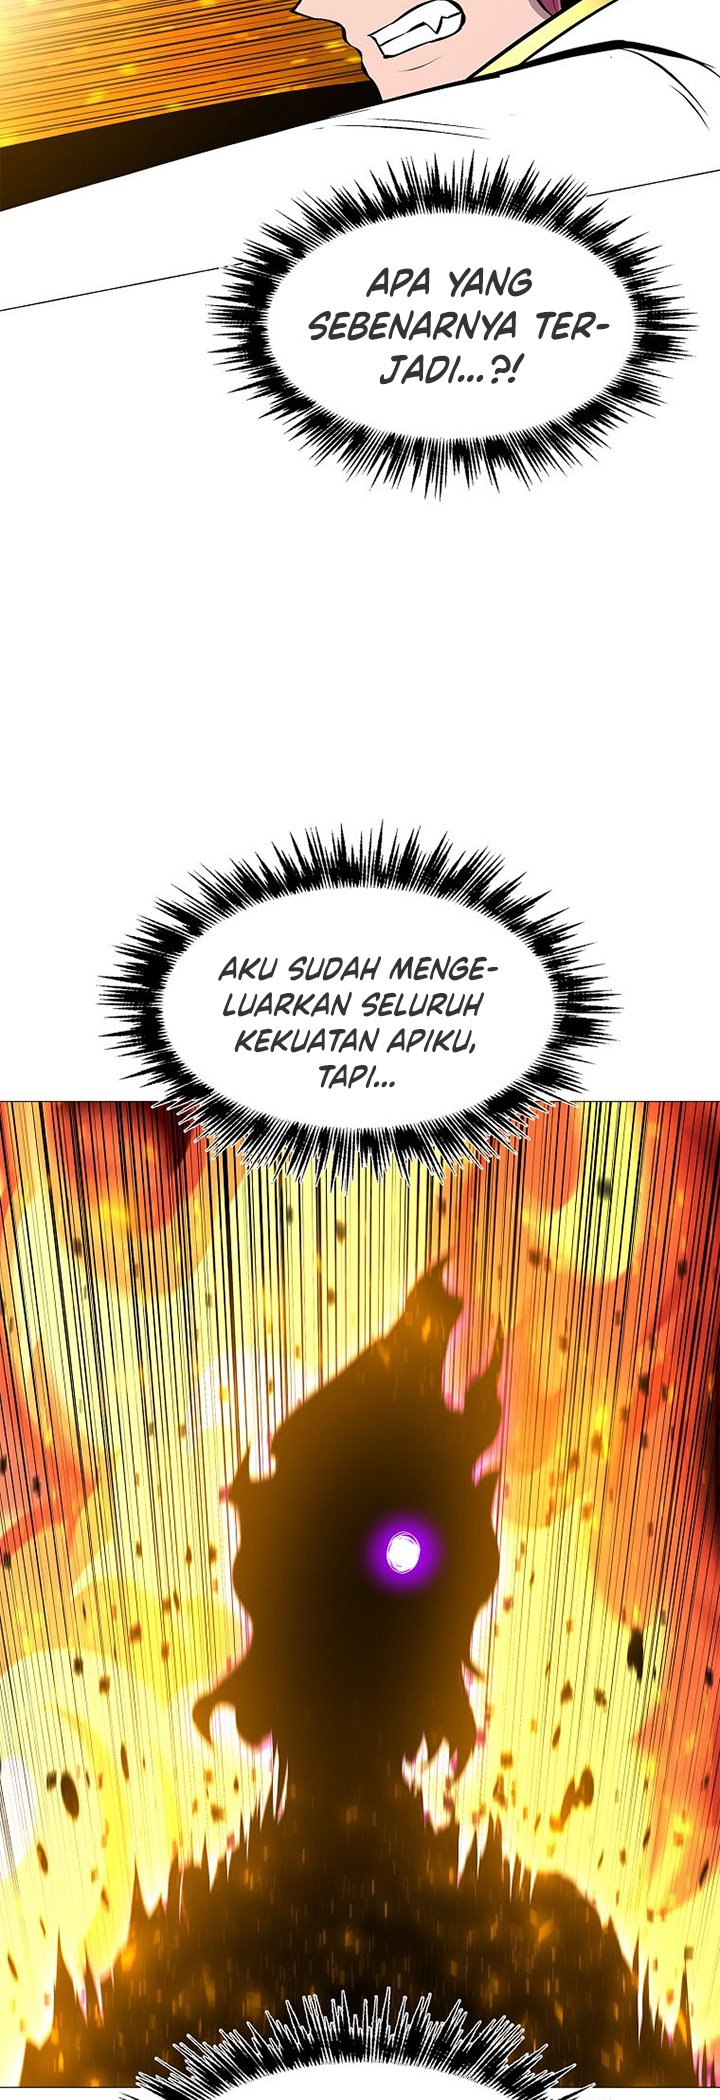 Updater Chapter 77